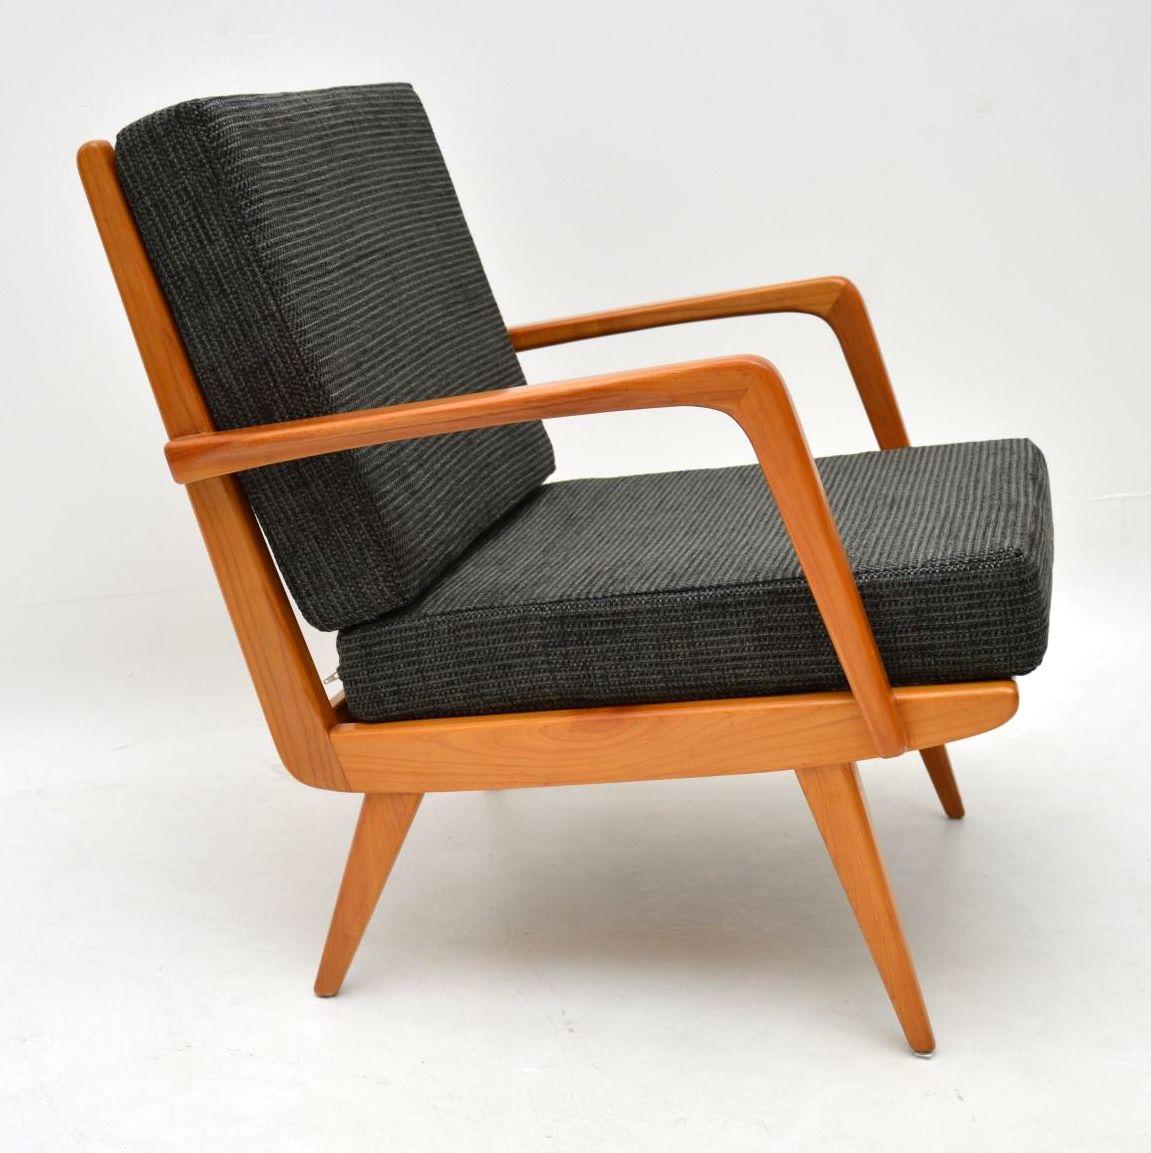 A stylish vintage Danish armchair dating from the 1960s, in solid cherrywood. We have had the frame stripped and re-polished to a very high standard, the cushions have been newly made and upholstered in a lovely charcoal fabric. The condition is